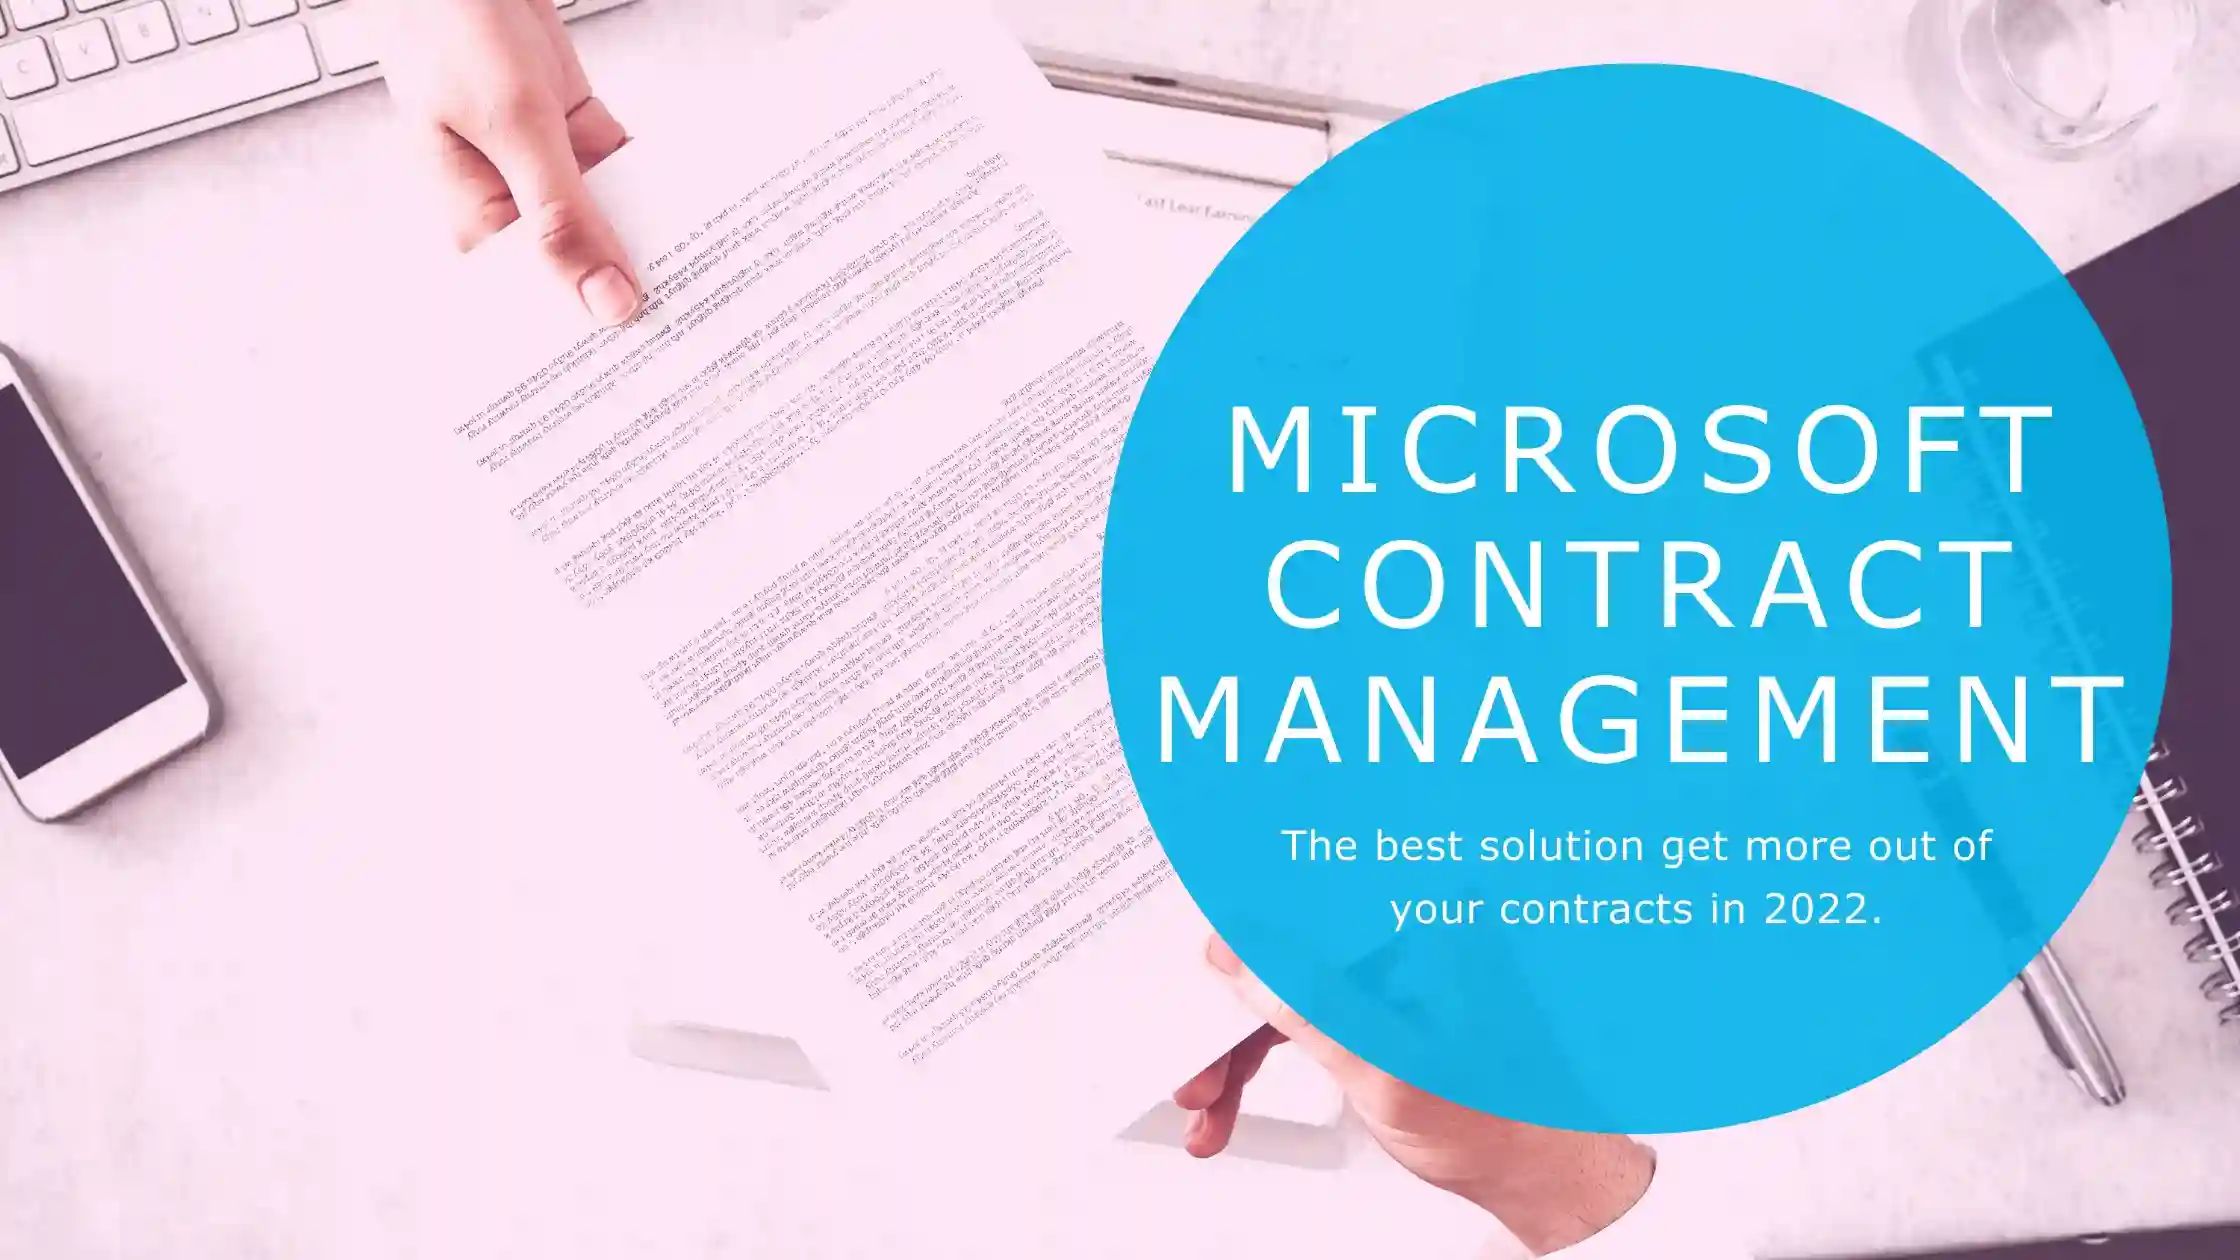 Microsoft Contract Management The best solution to get more out of your contracts in 2022.